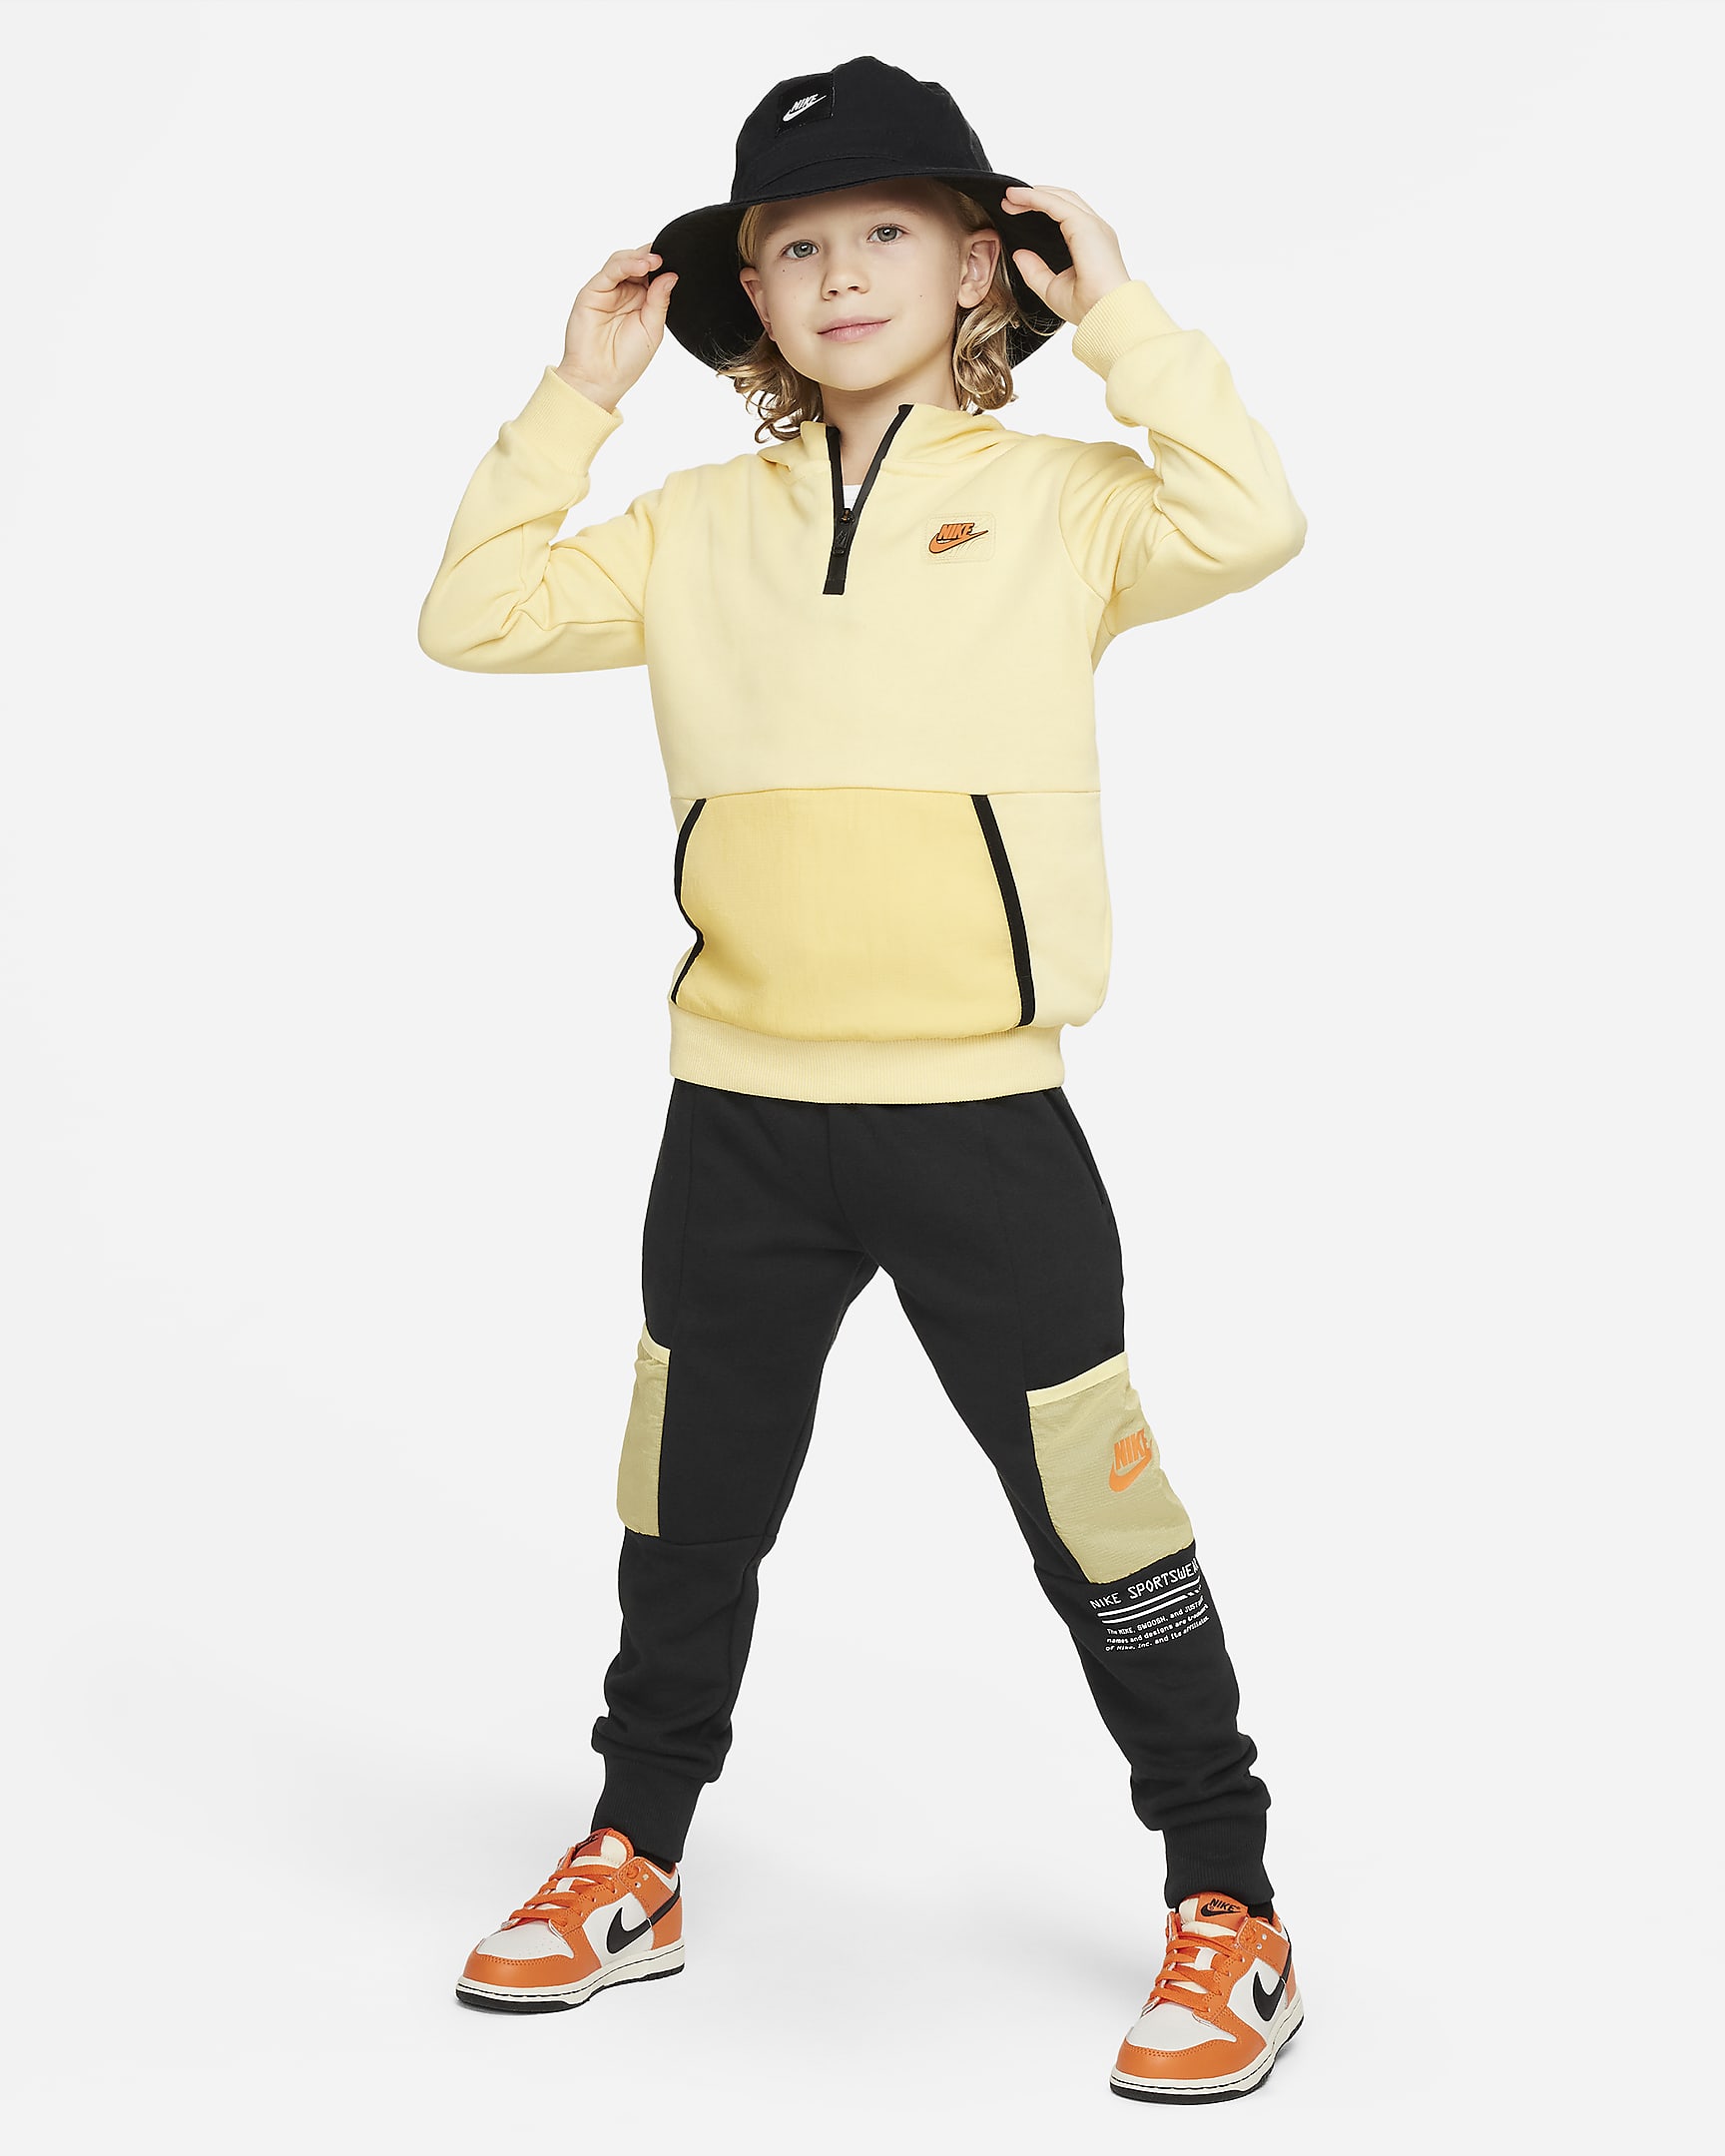 Nike Sportswear Paint Your Future Little Kids' French Terry Pants. Nike.com